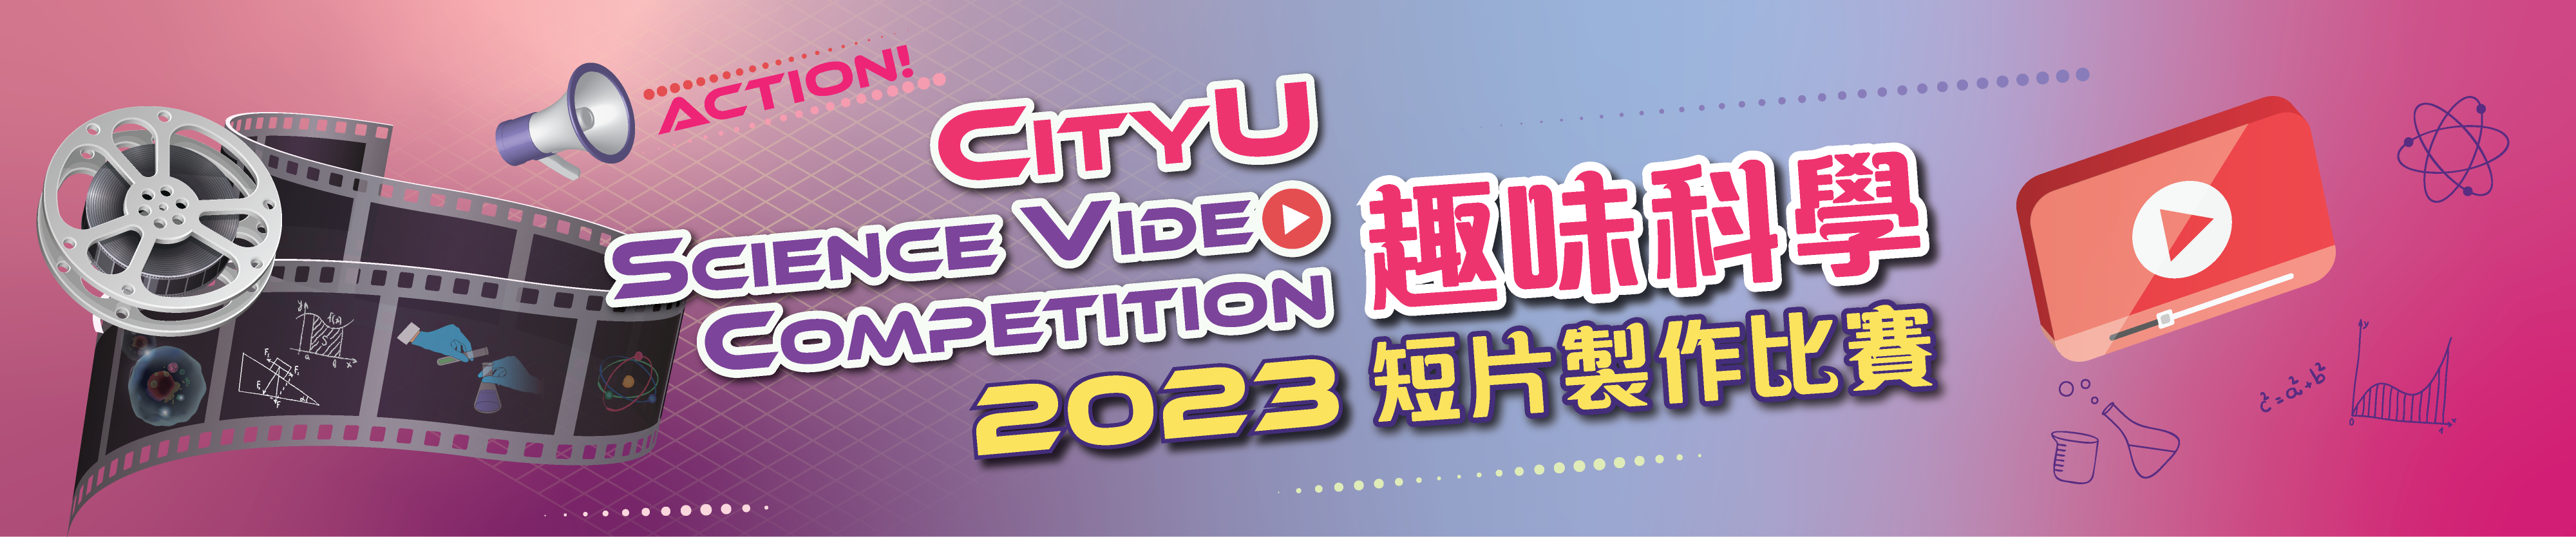 Science Video Competition 2023